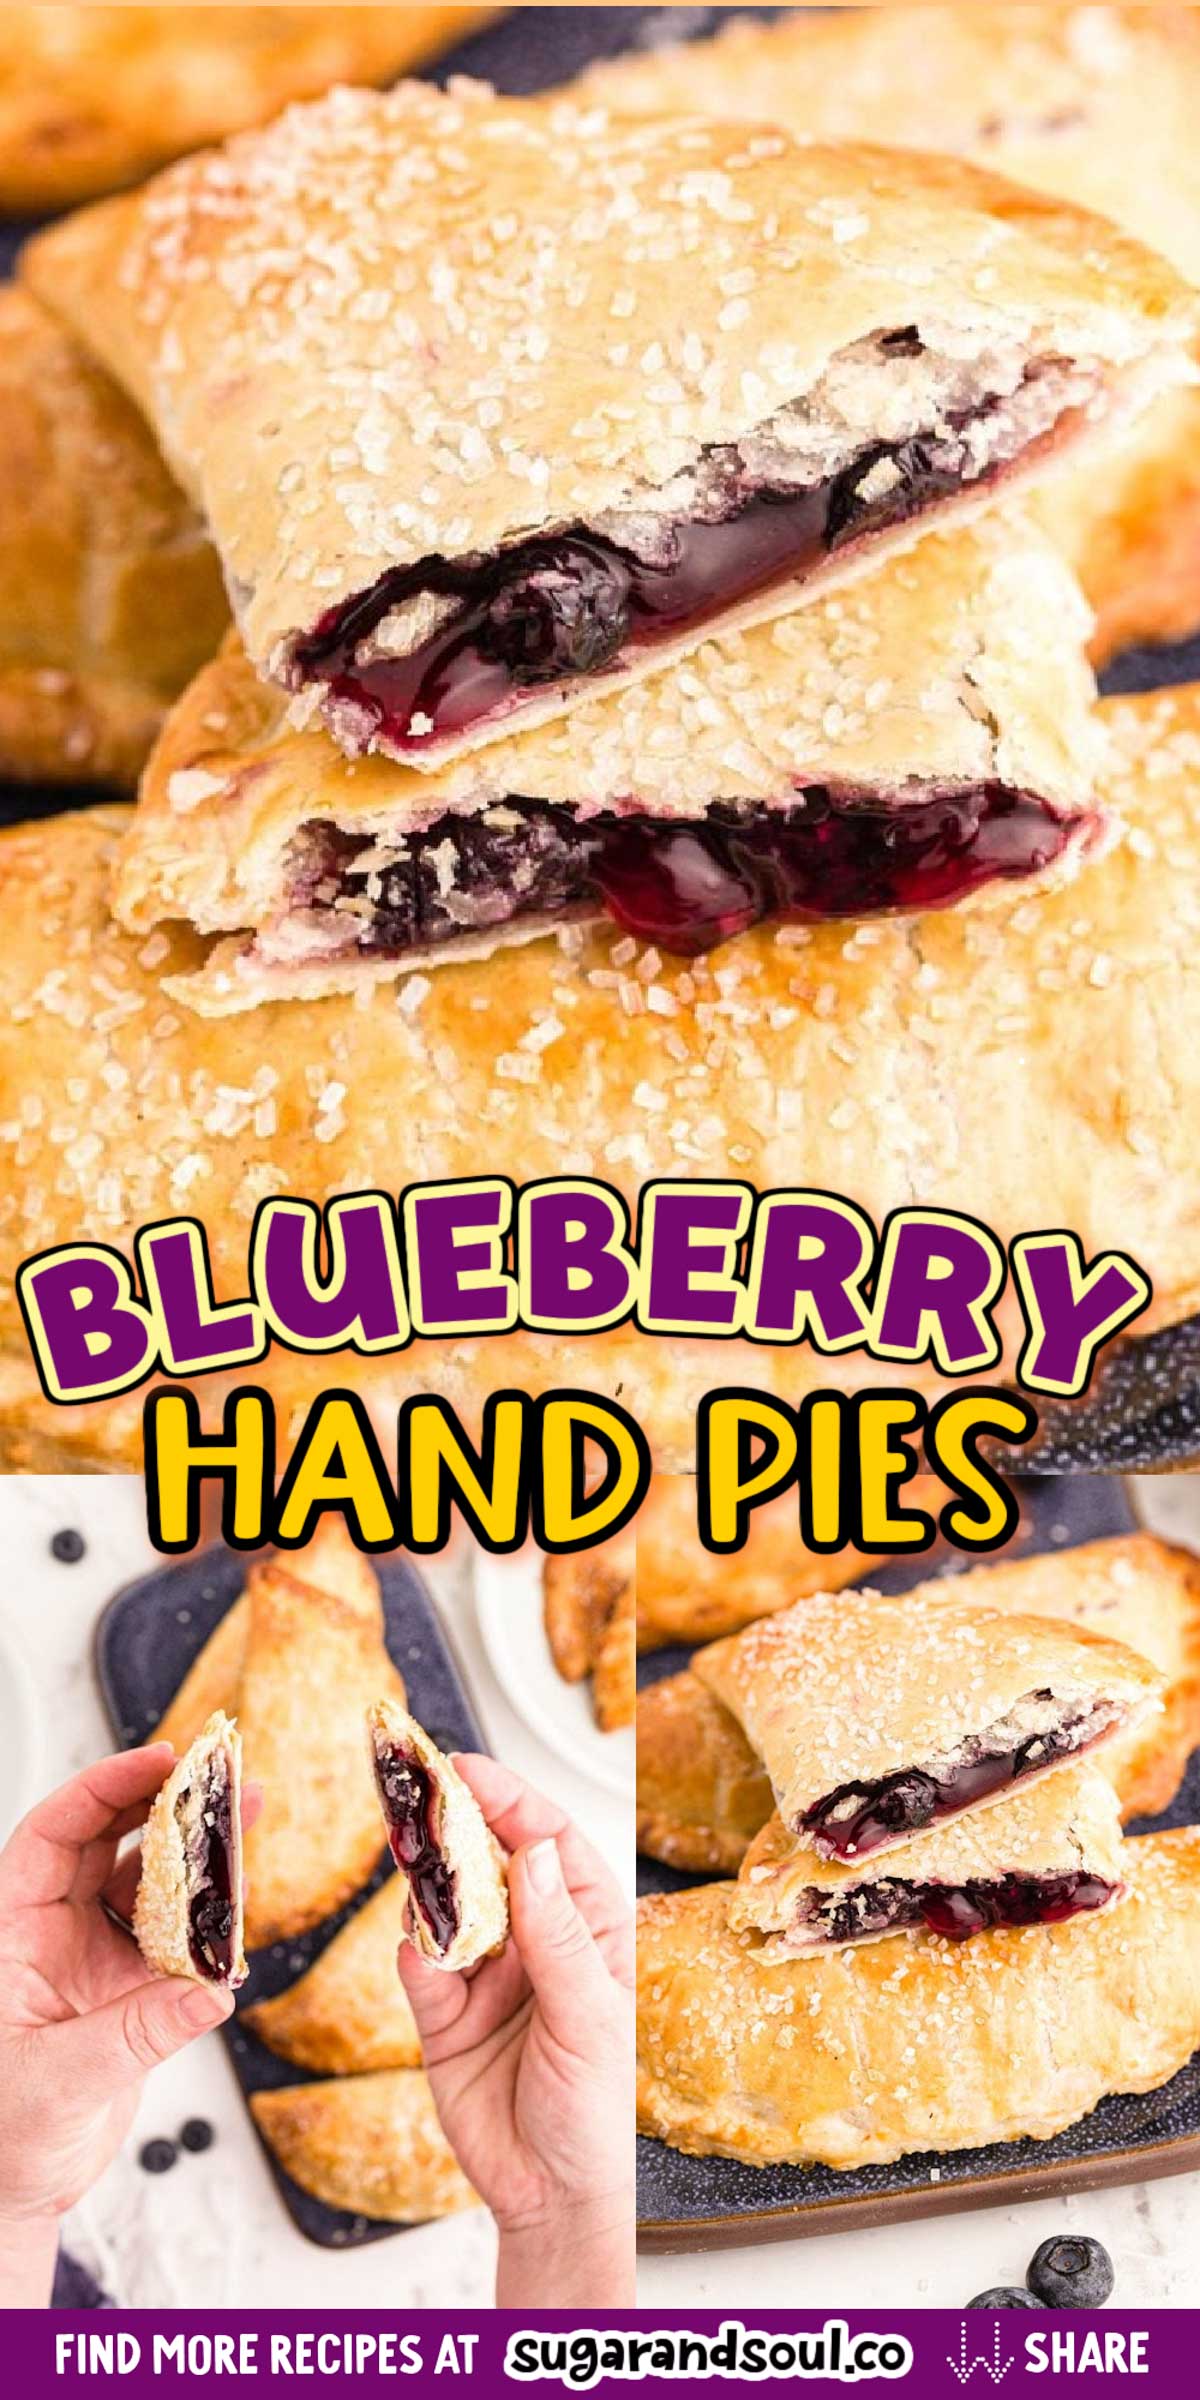 Blueberry Hand Pies are bursting with juicy blueberry filling and baked to a beautiful golden brown, all made easy using store-bought ingredients! via @sugarandsoulco